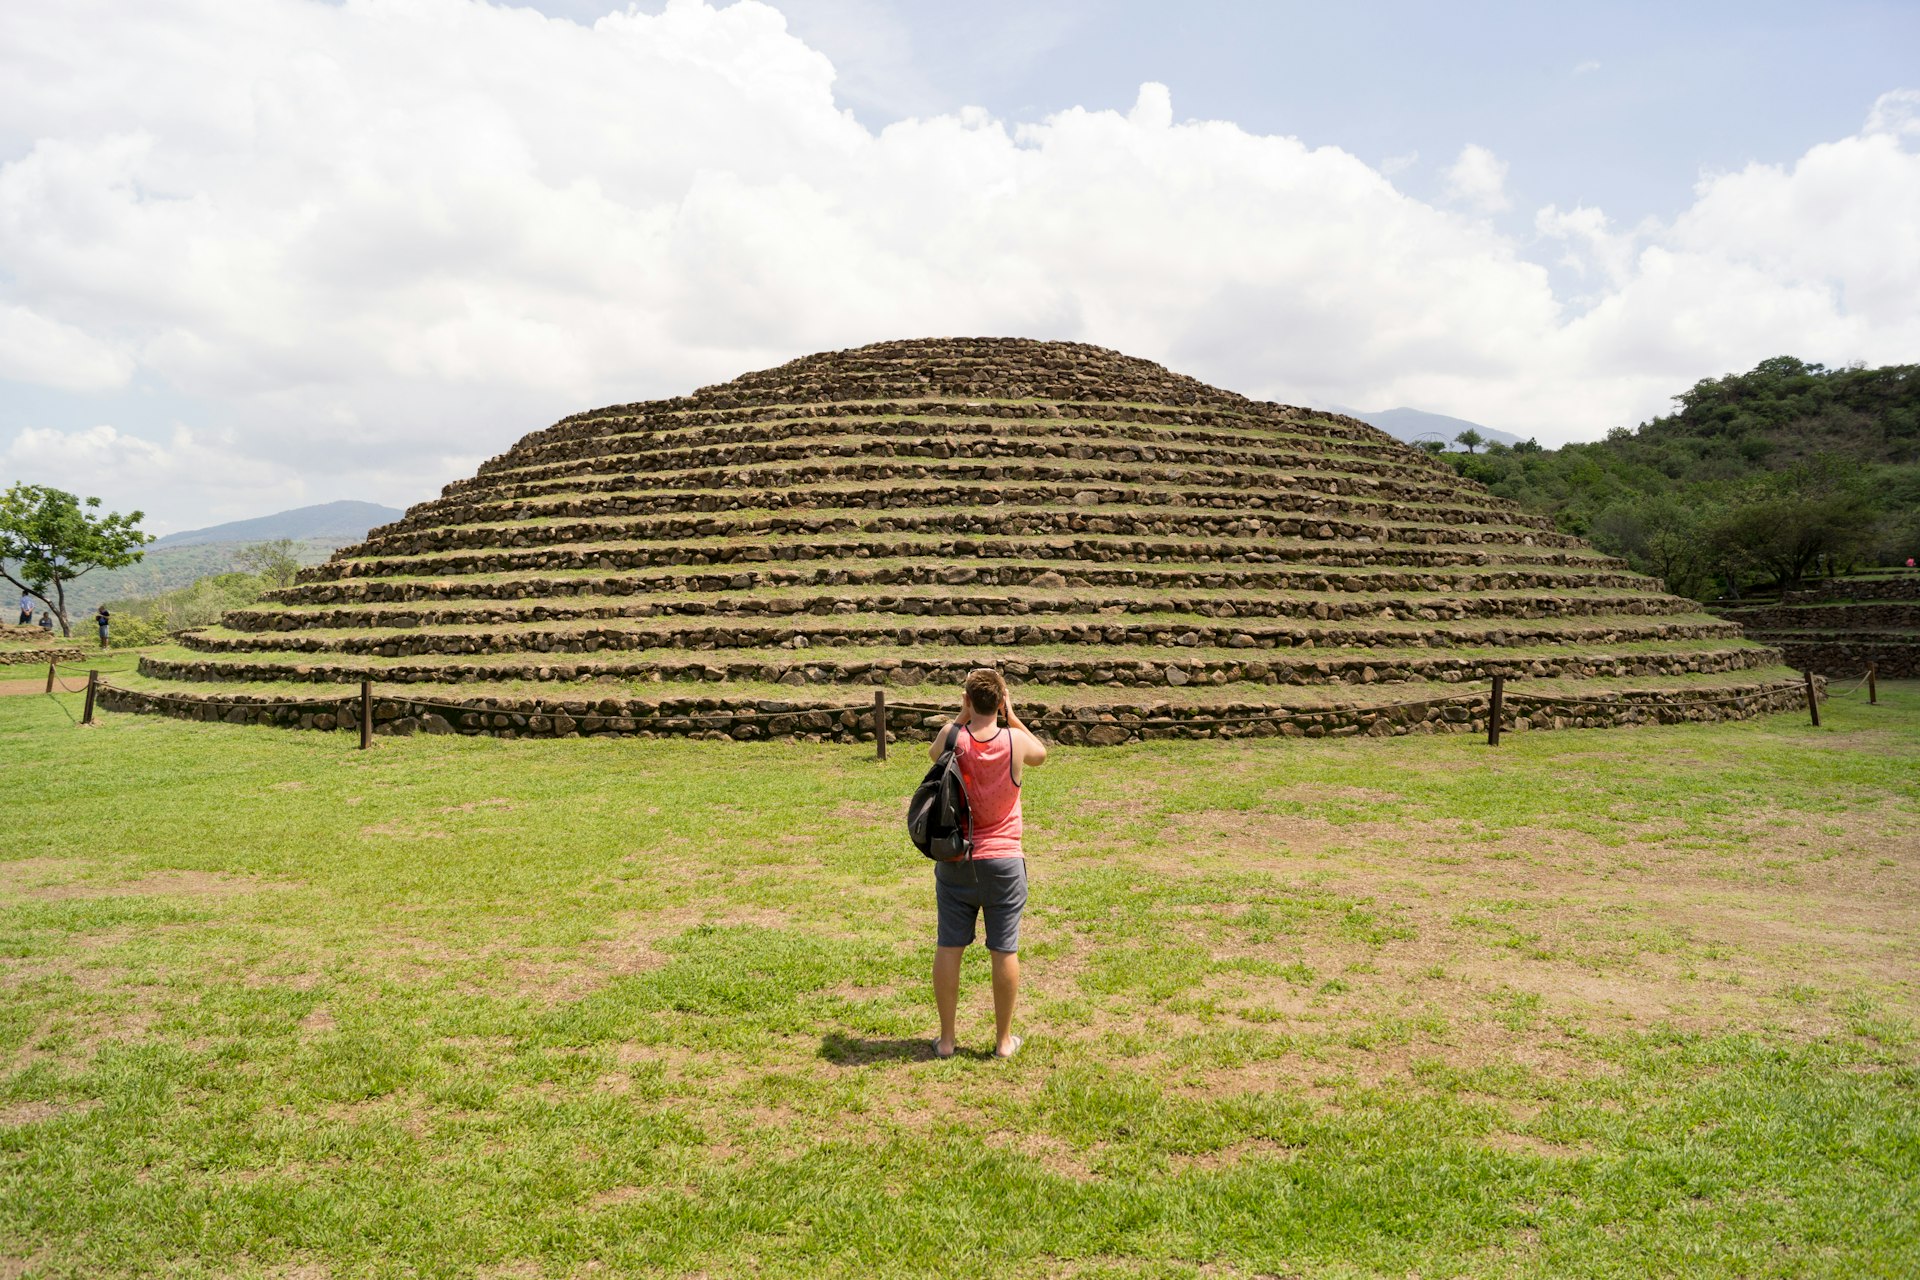 A tourist looks up at the Guachimontones ruins, a pyramid-like structure covered in green moss